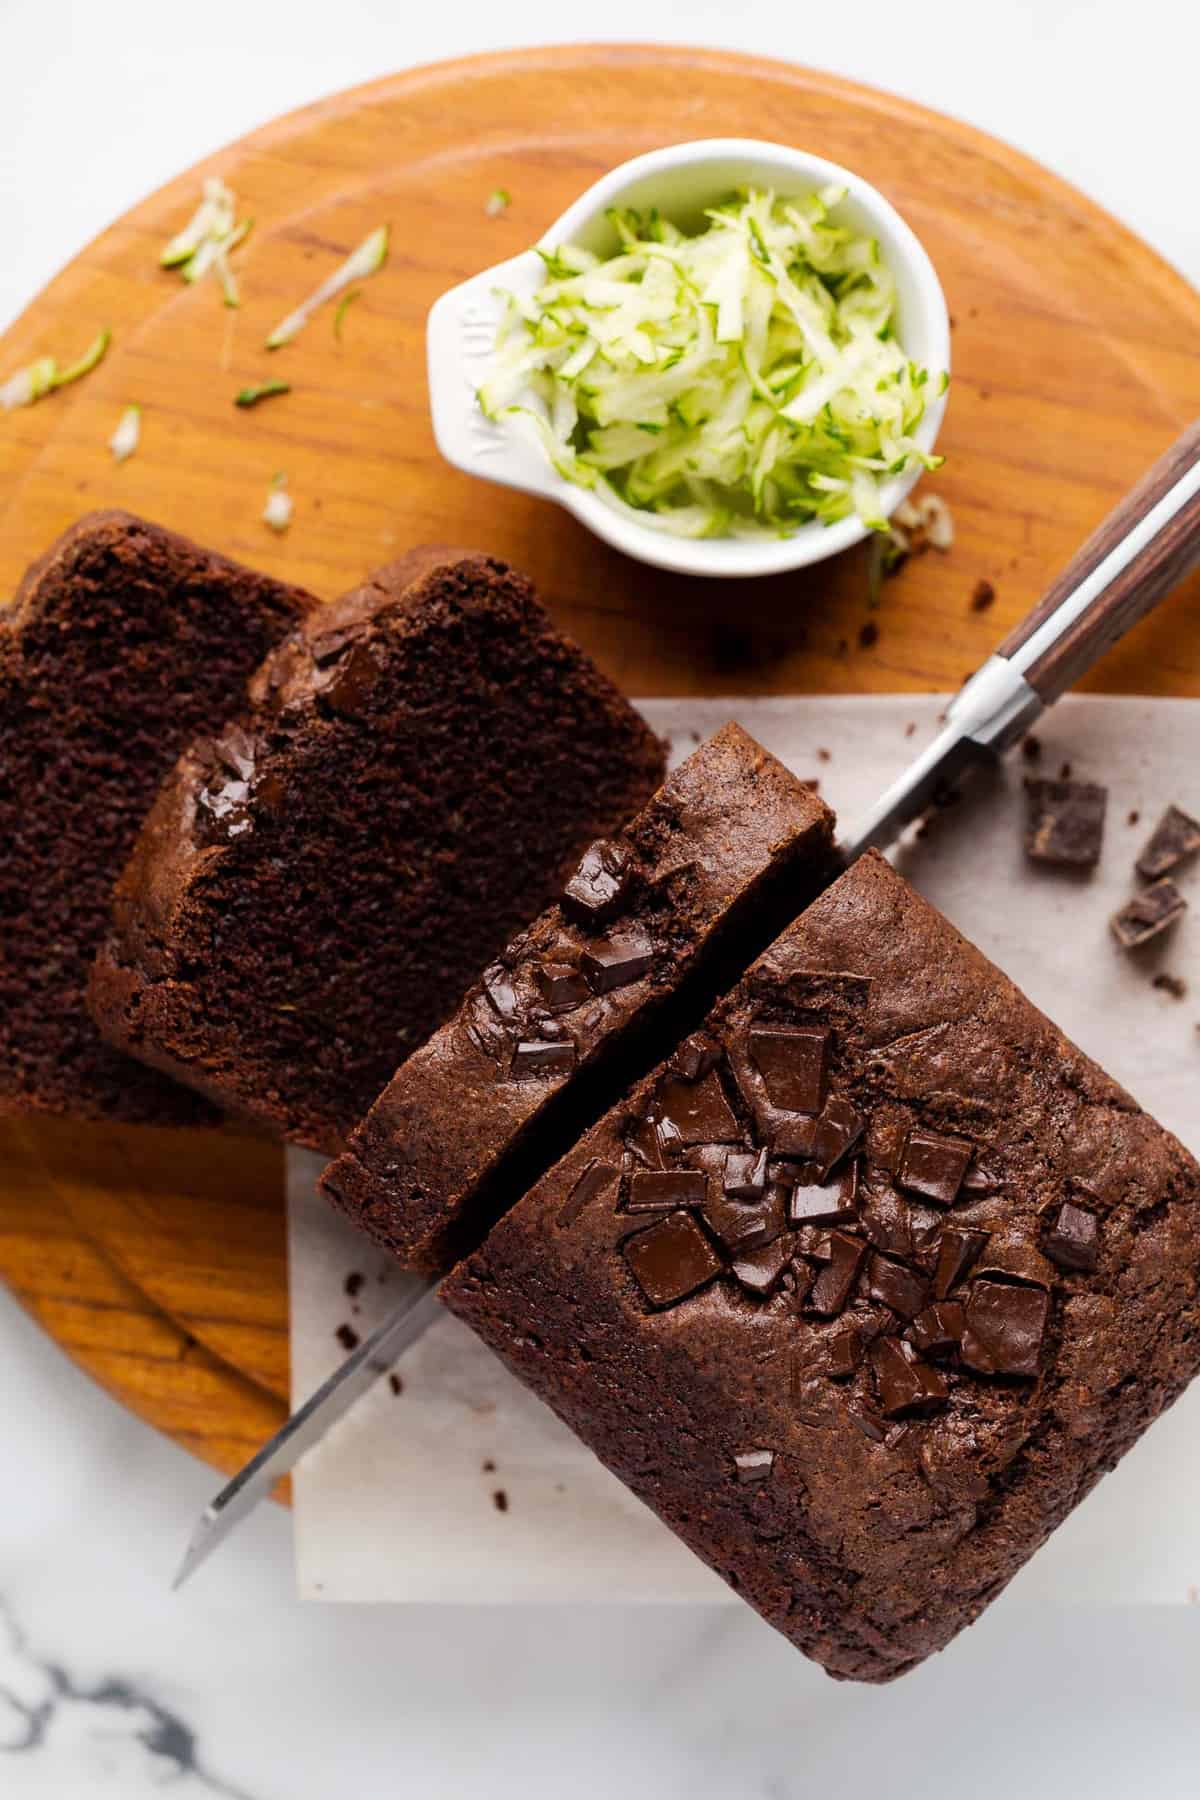 Bird's eye view of a loaf of vegan chocolate zucchini bread being sliced with a wood-handled serrated knife. The loaf is on a small piece of parchment paper on a round wooden teak cutting board on a marble countertop.